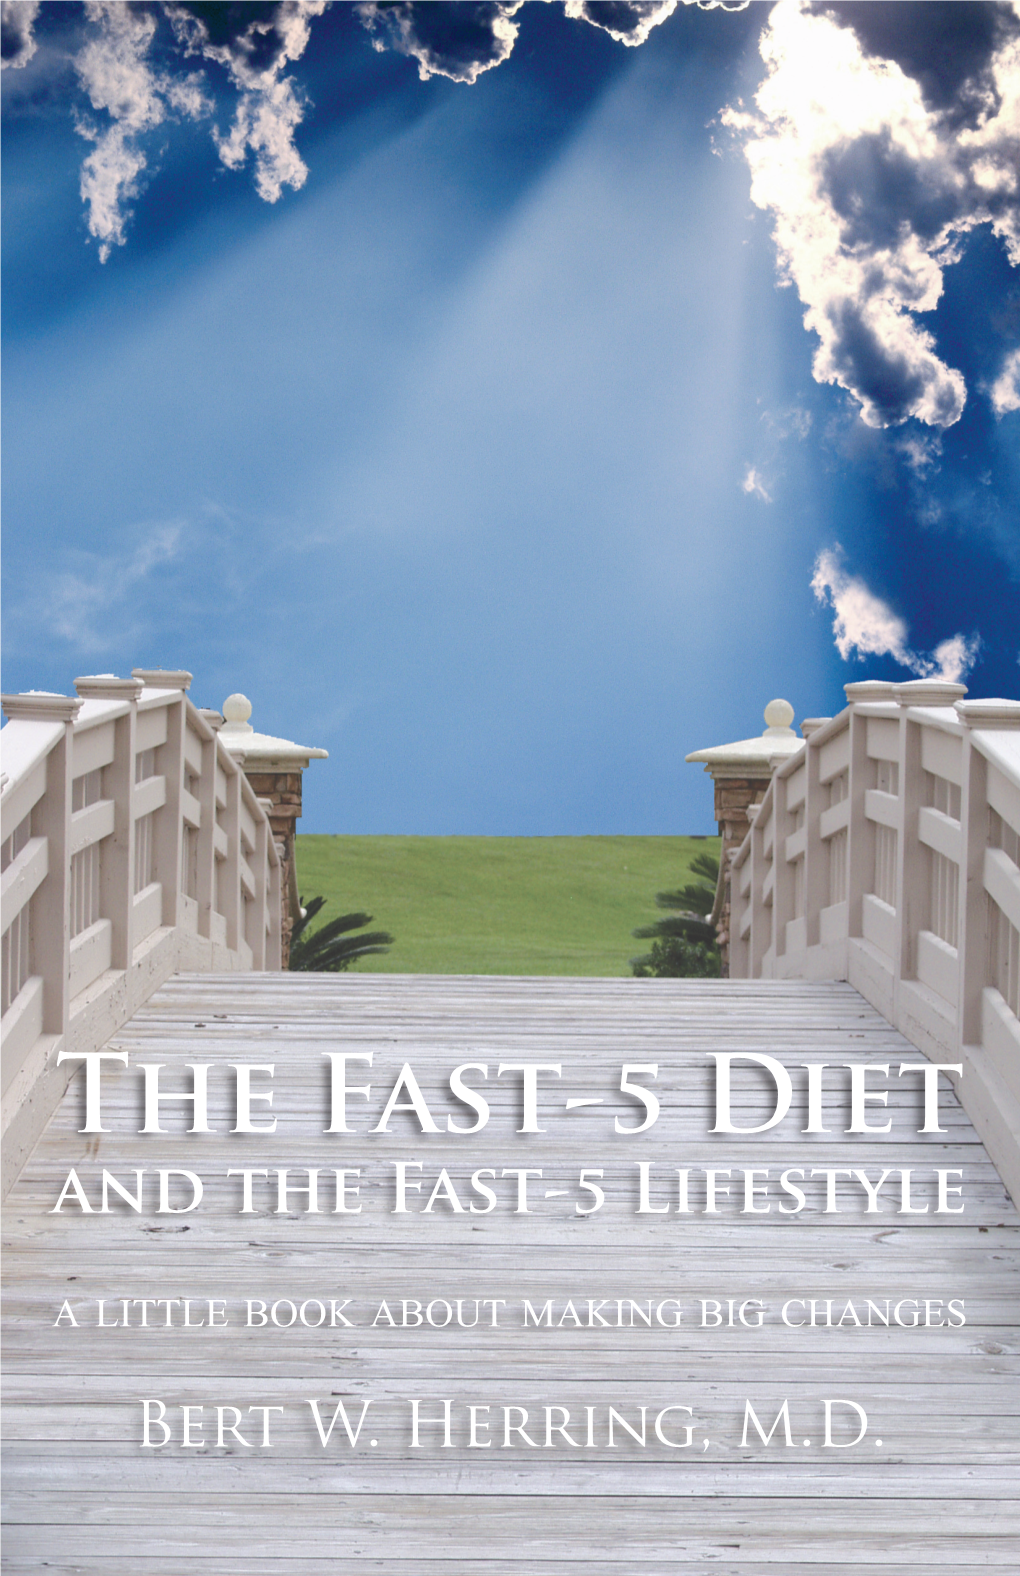 The Fast-5 Diet and the Fast-5 Lifestyle a Little Book About Making Big Changes Bert W